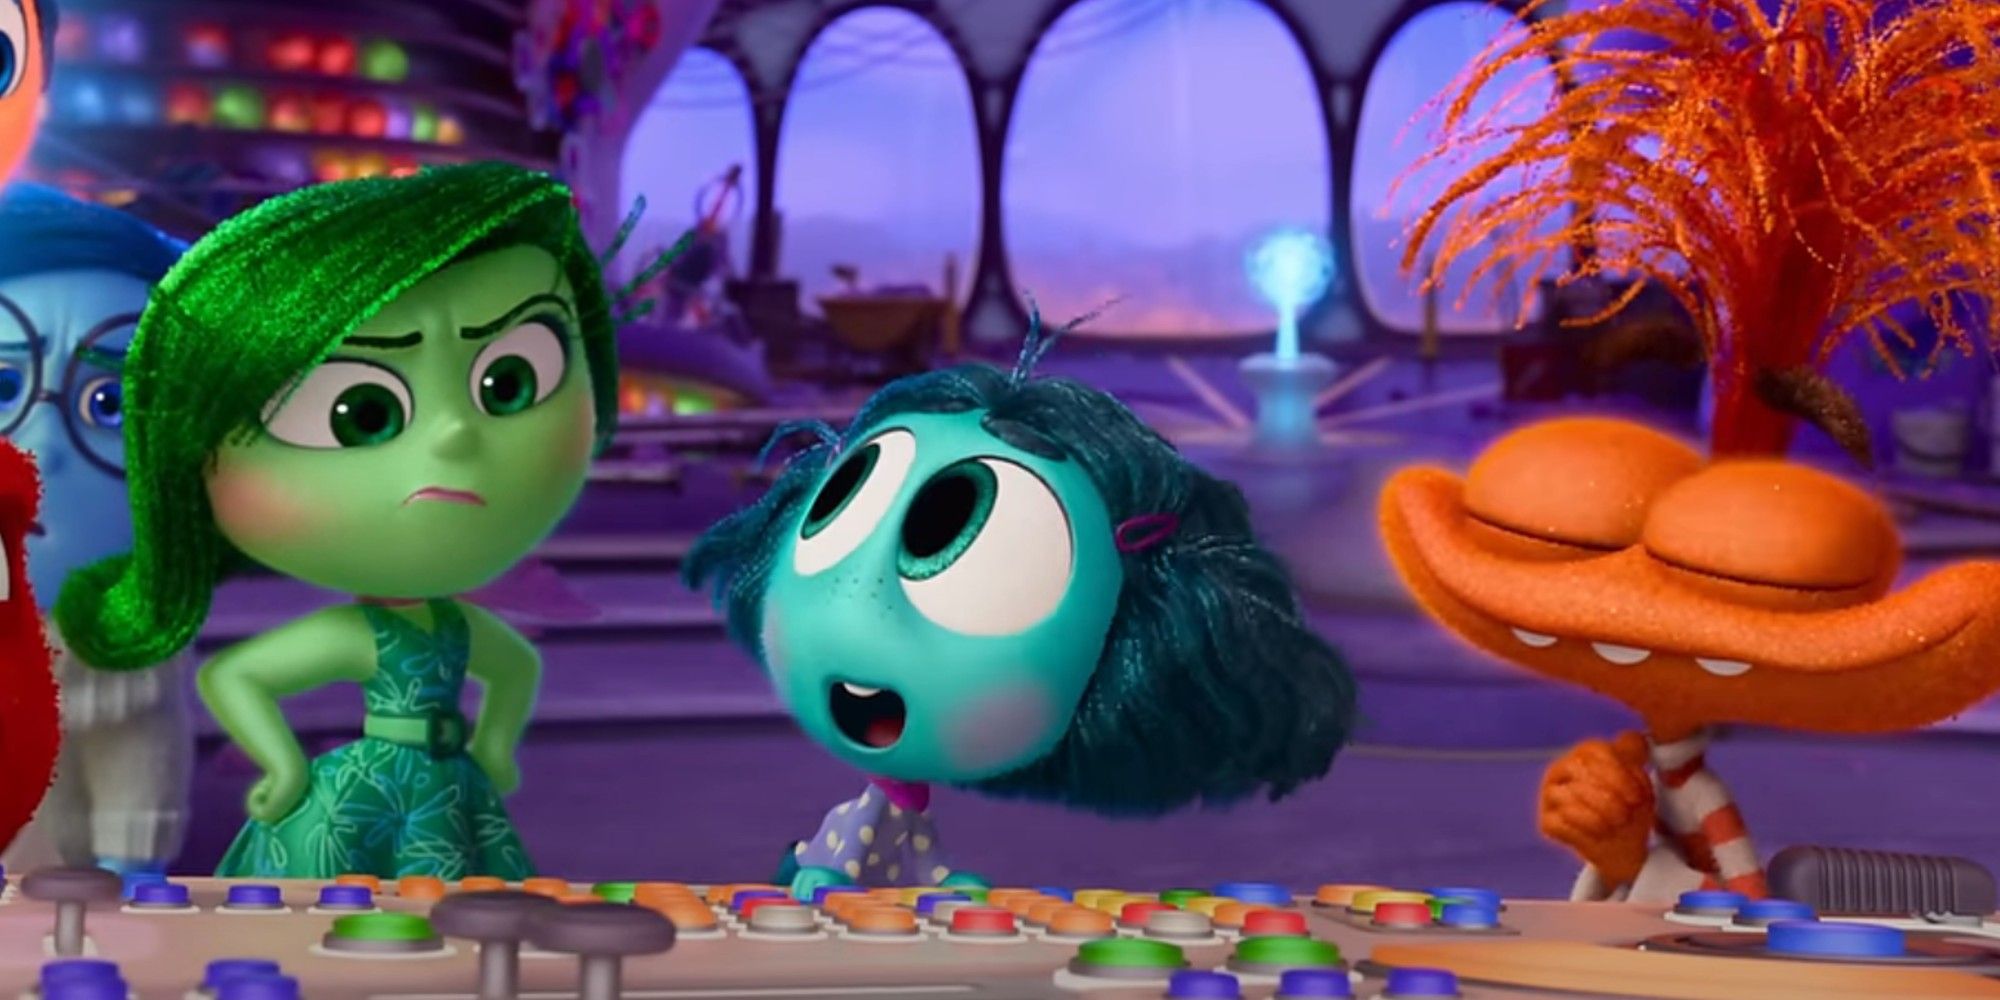 how-inside-out-2’s-new-emotions-were-chosen-(&-why-5-were-cut)-explained-by-director